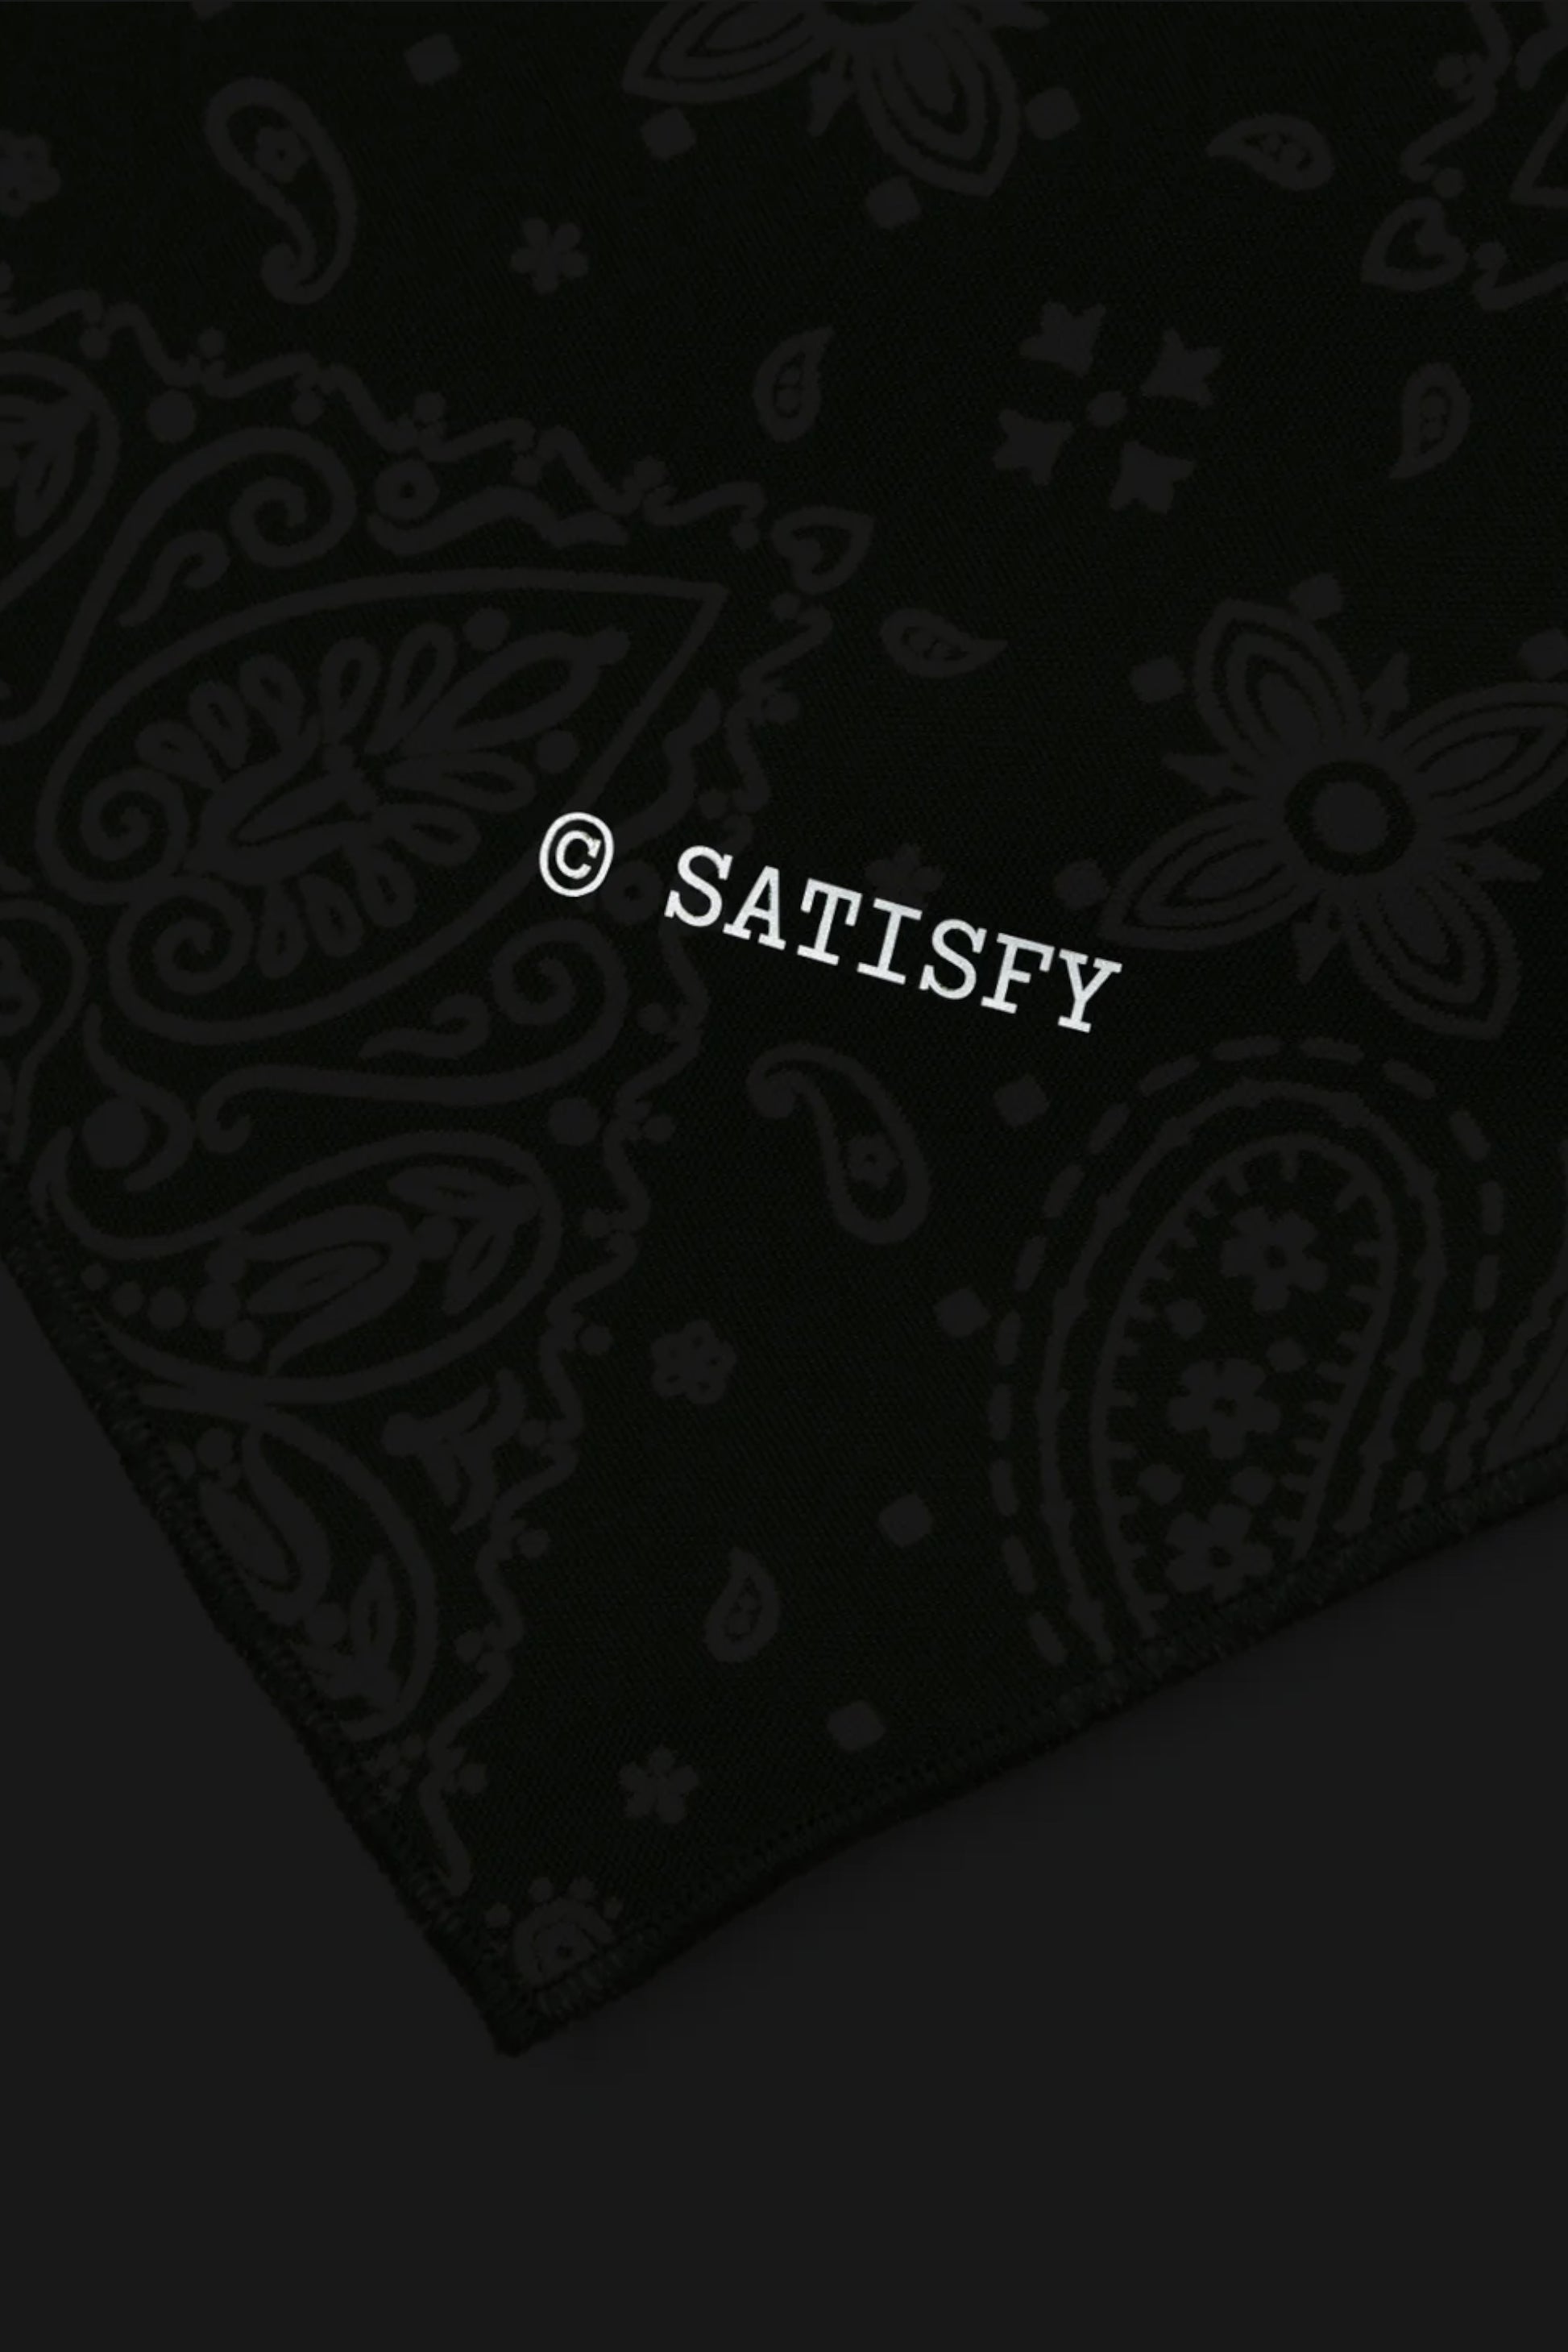 Satisfy - SoftCell™ Bandana (Pale Blue)